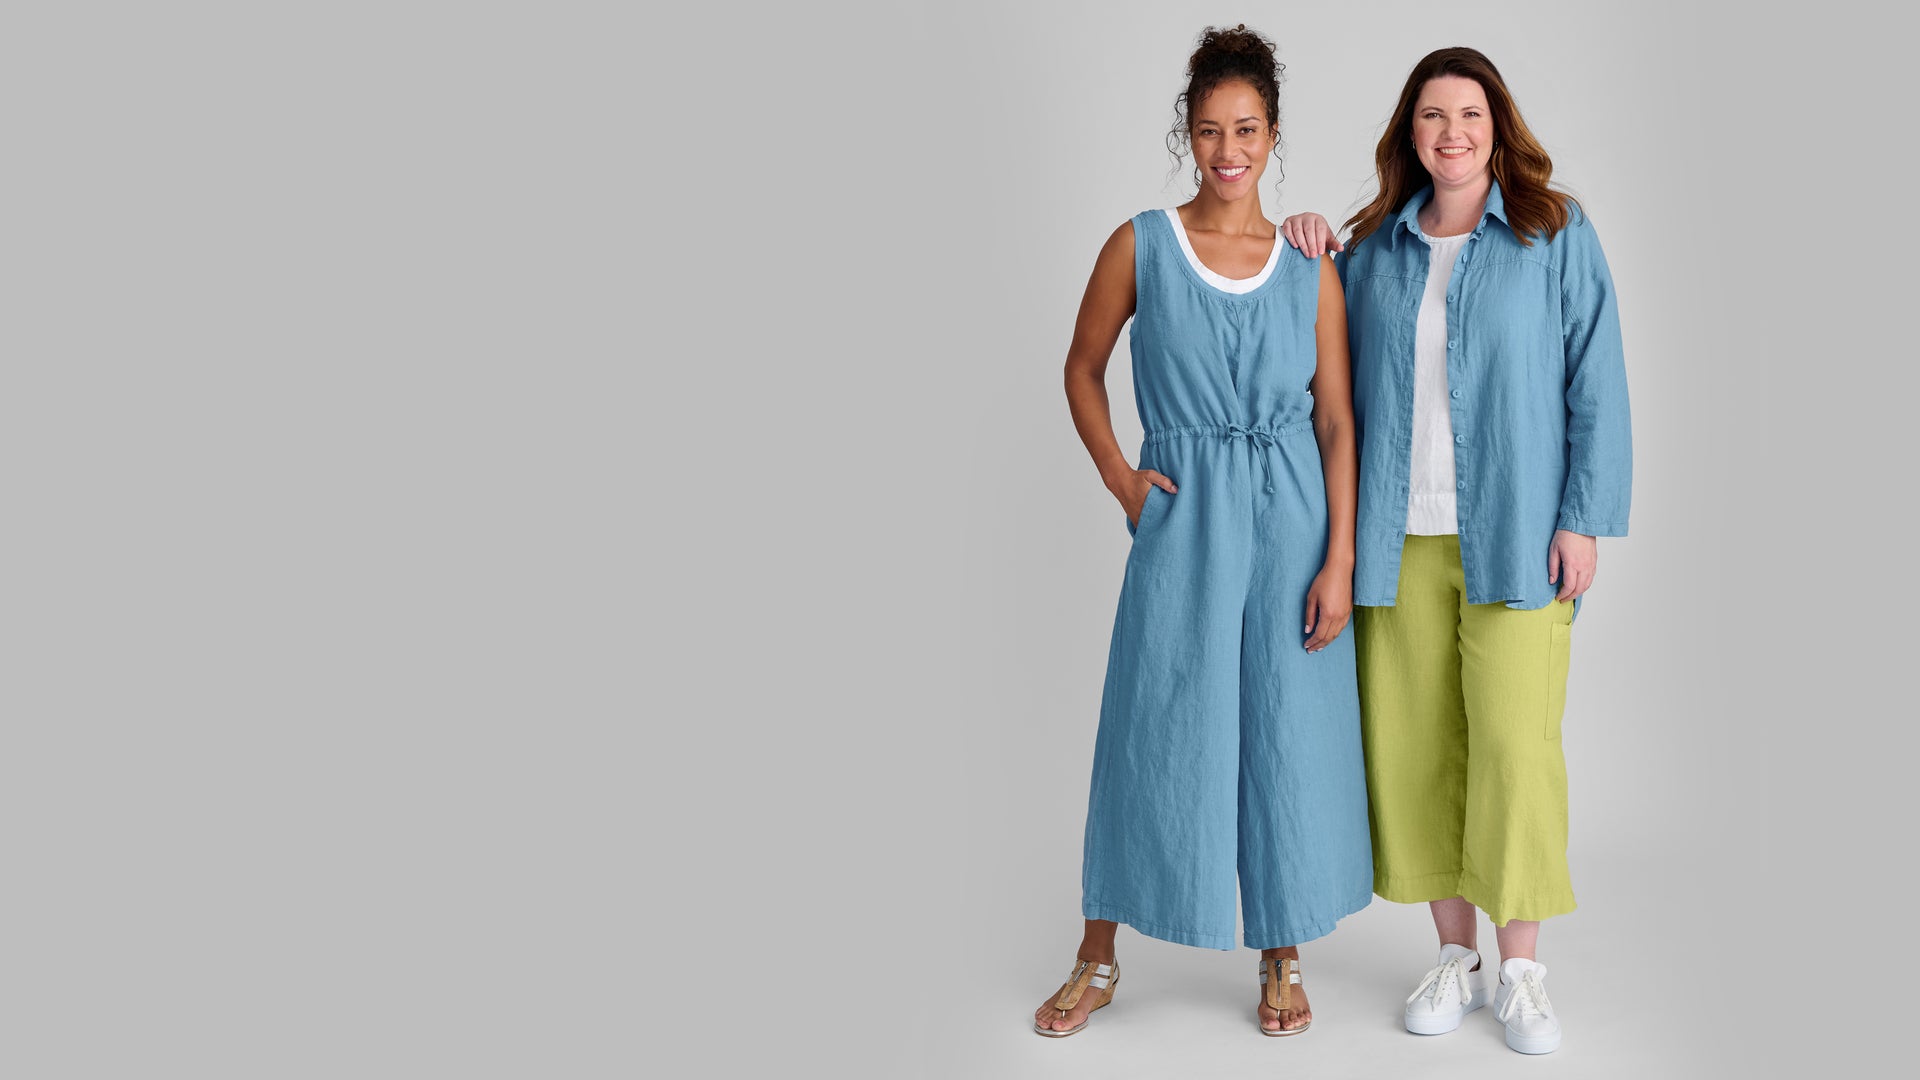 Women's linen clothing collection - Urban 2024